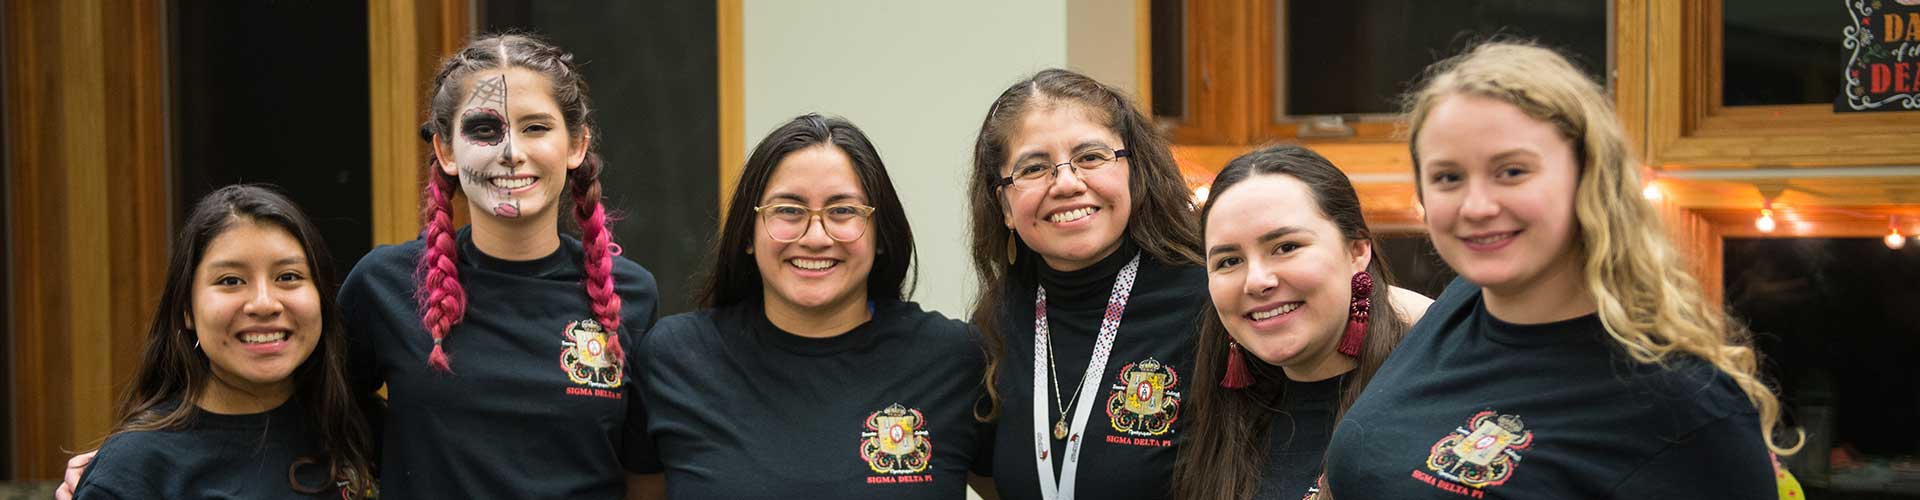 Dr. Colorado-Garcia and students at Day of the Dead event